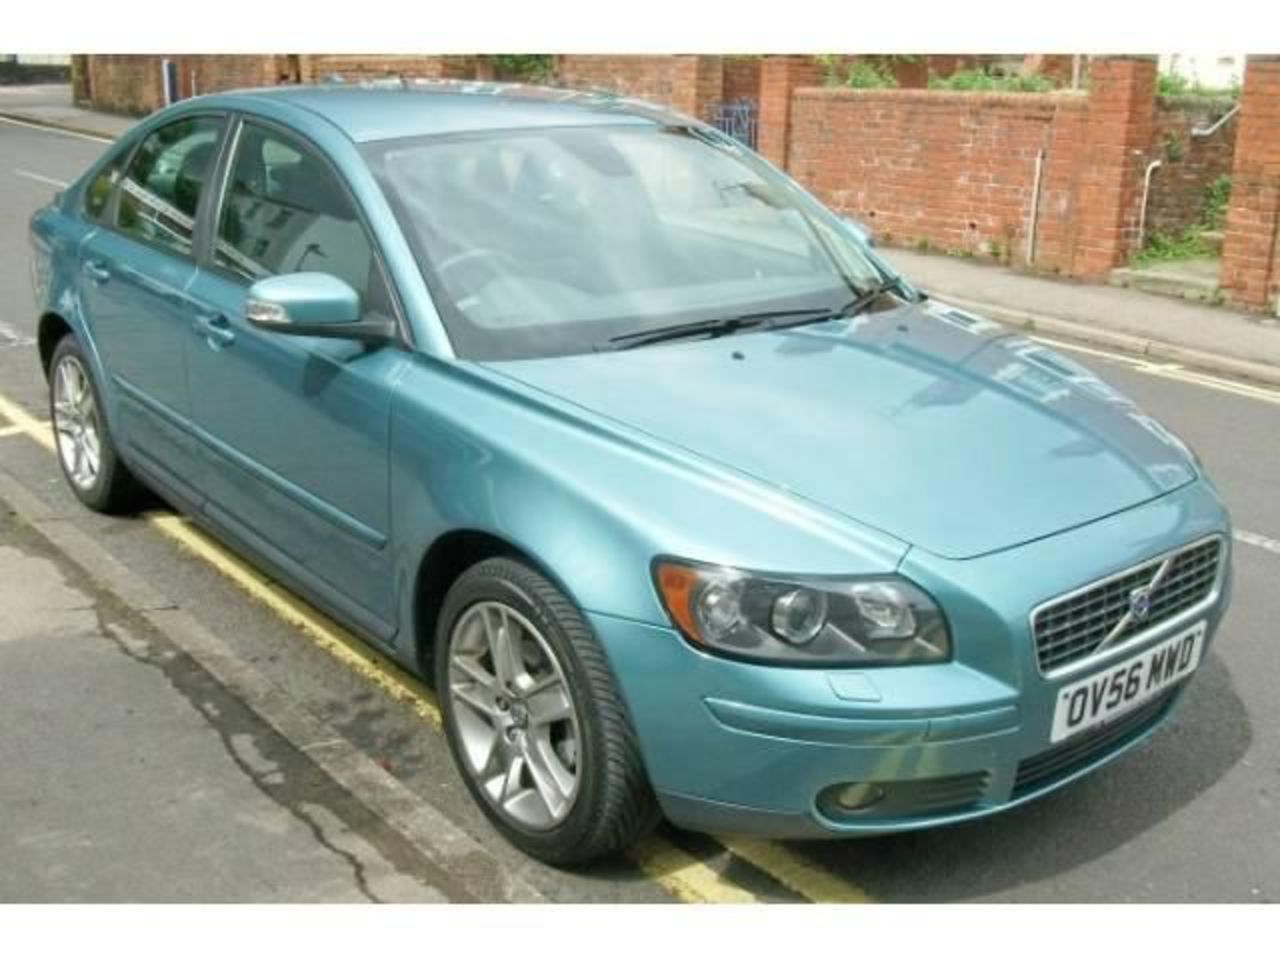 Volvo S40 Petrol. View Download Wallpaper. 640x480. Comments